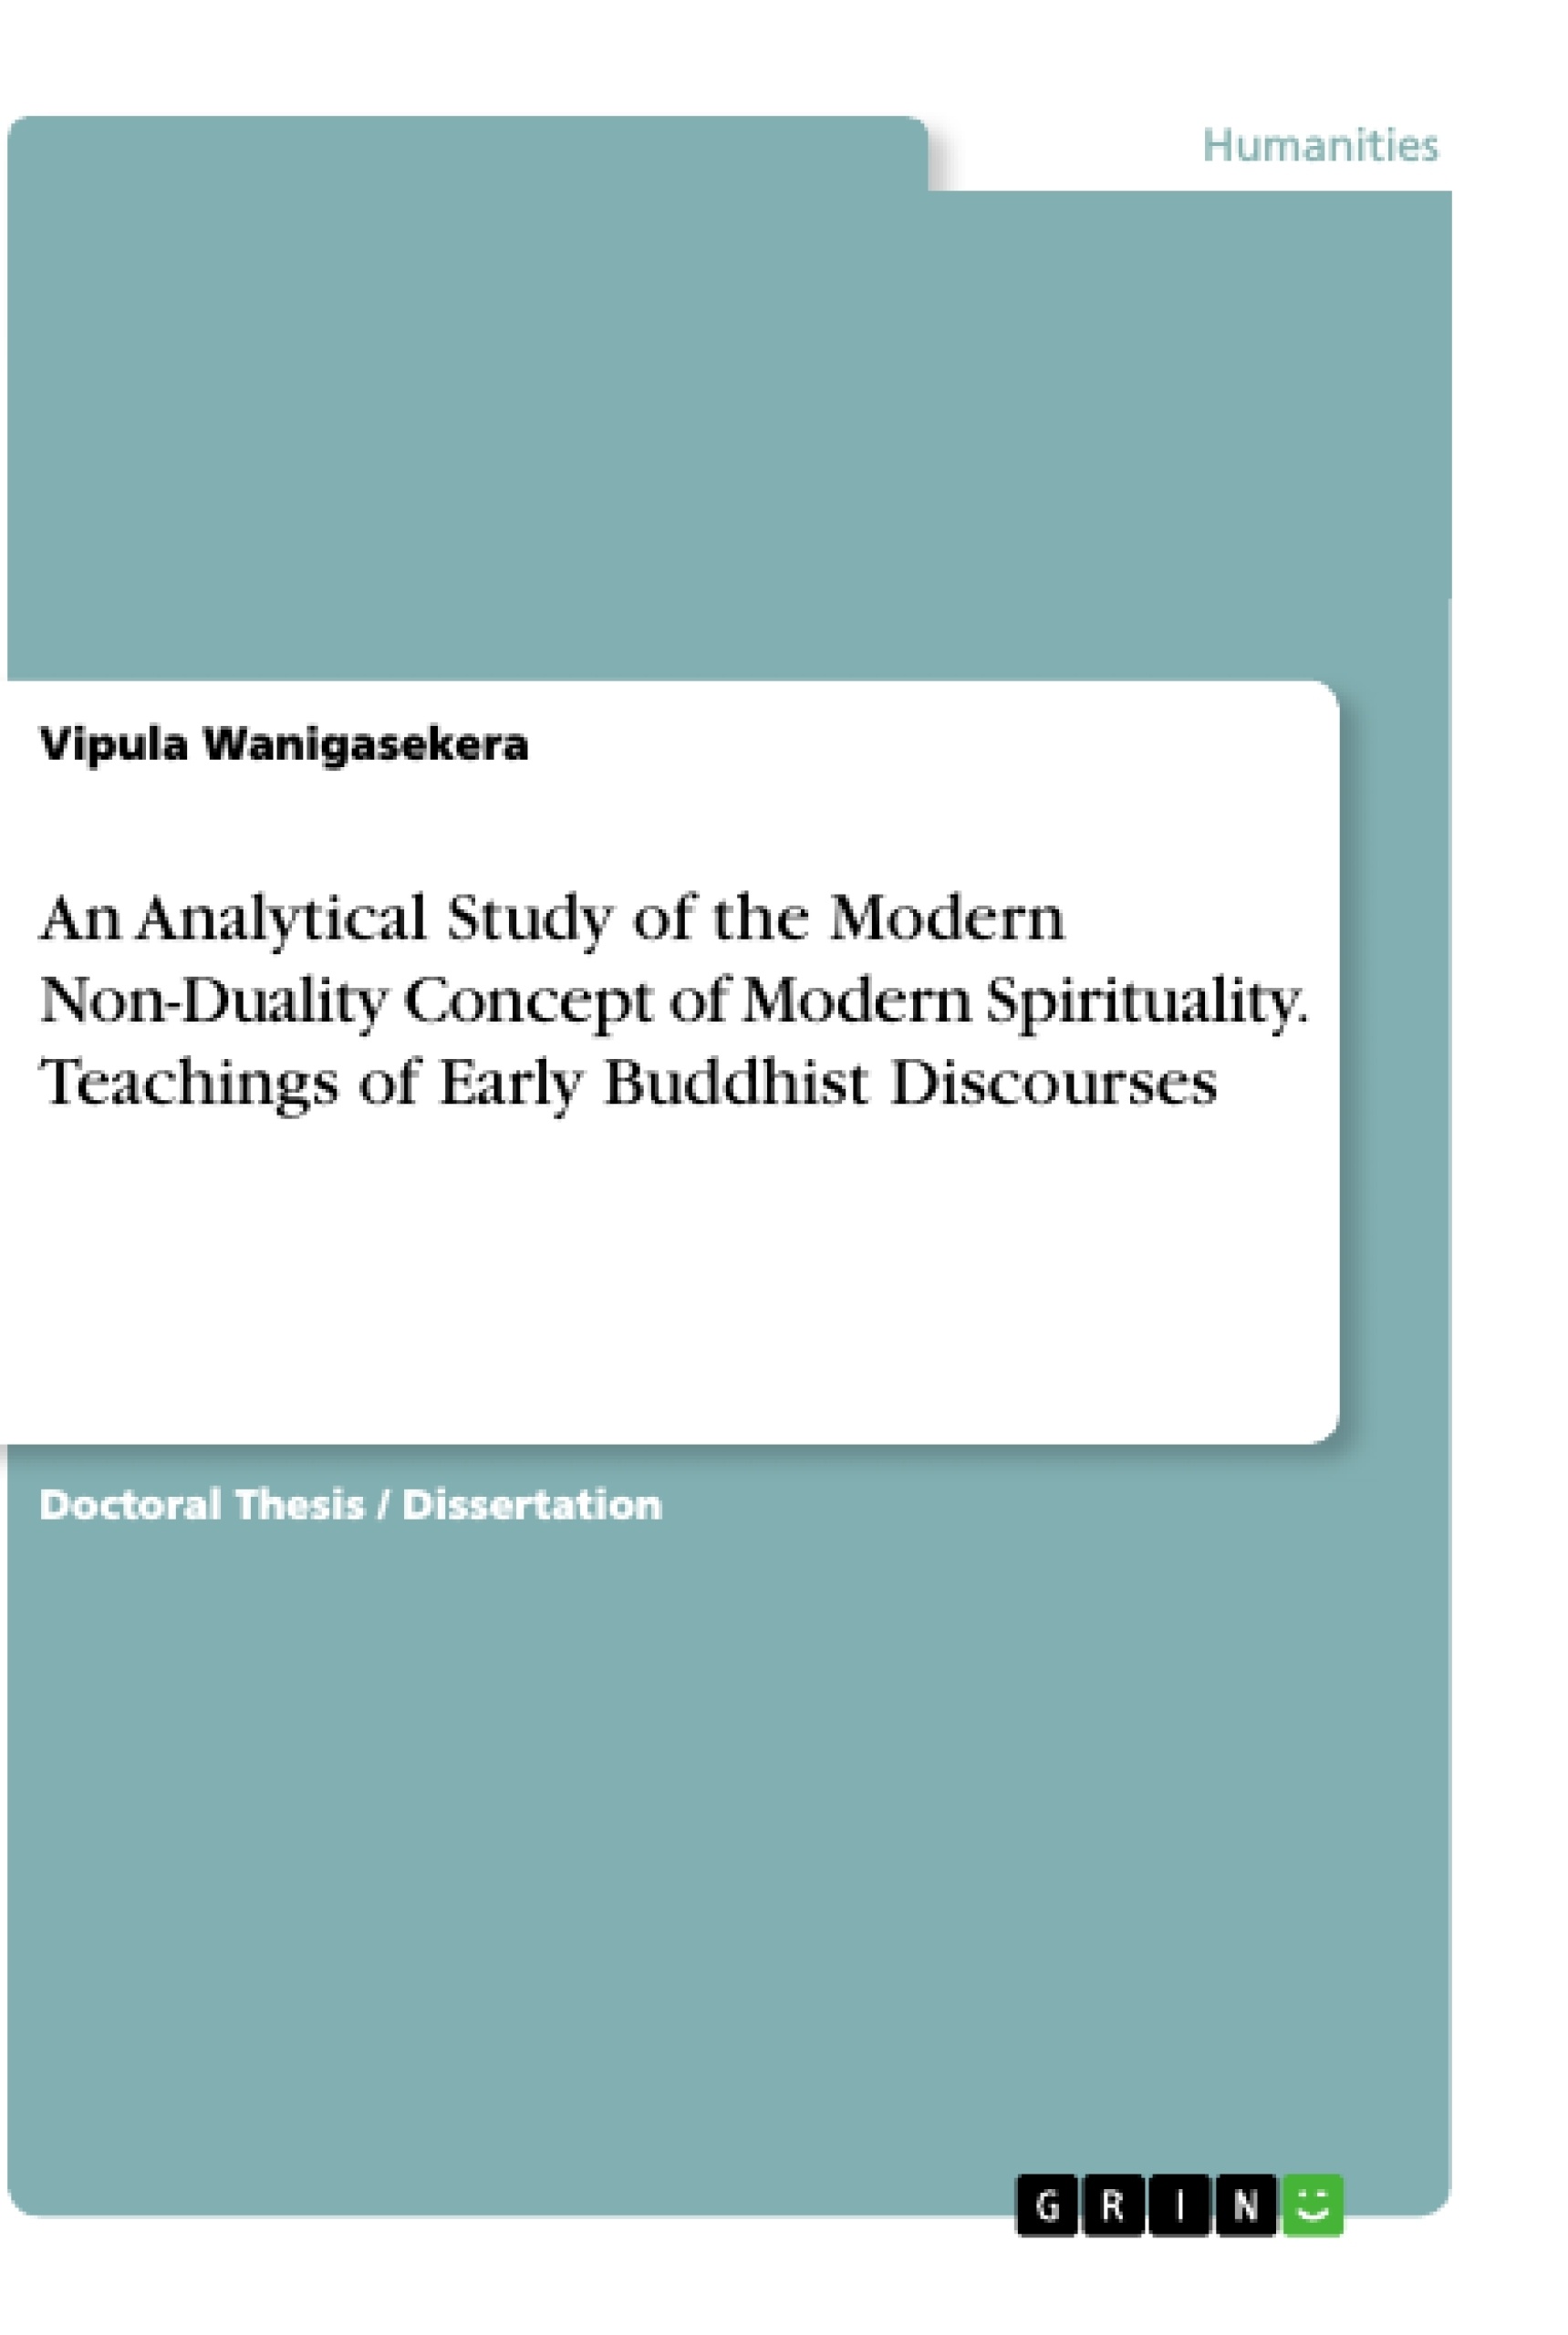 Titre: An Analytical Study of the Modern Non-Duality Concept of Modern Spirituality. Teachings of Early Buddhist Discourses